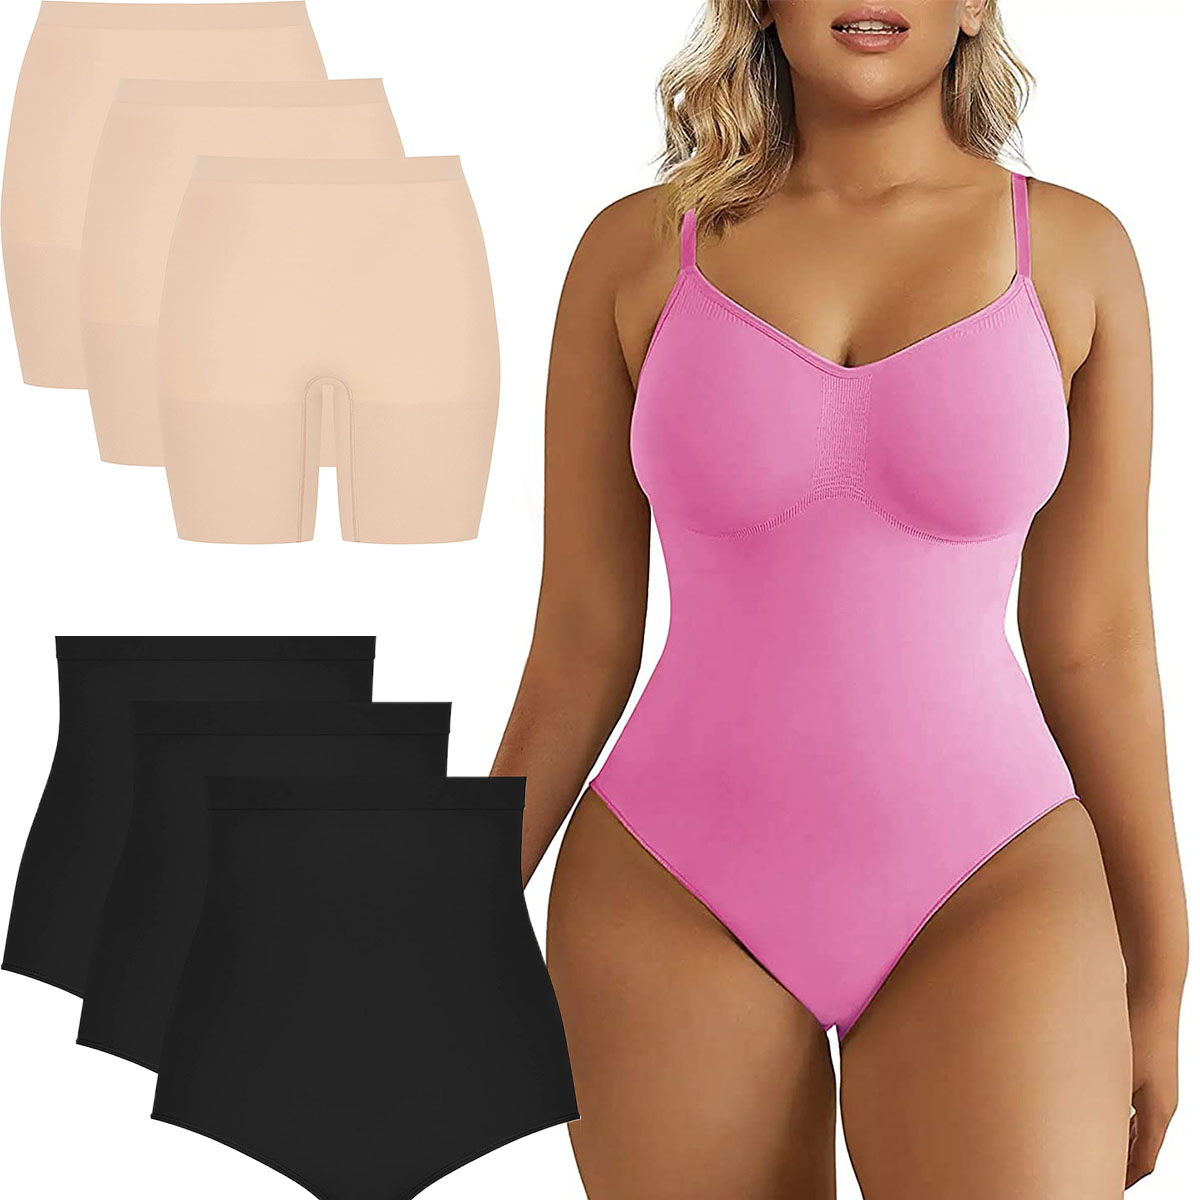 Top-Rated Shapewear To Help You Feel Your Best: SKIMS, Spanx